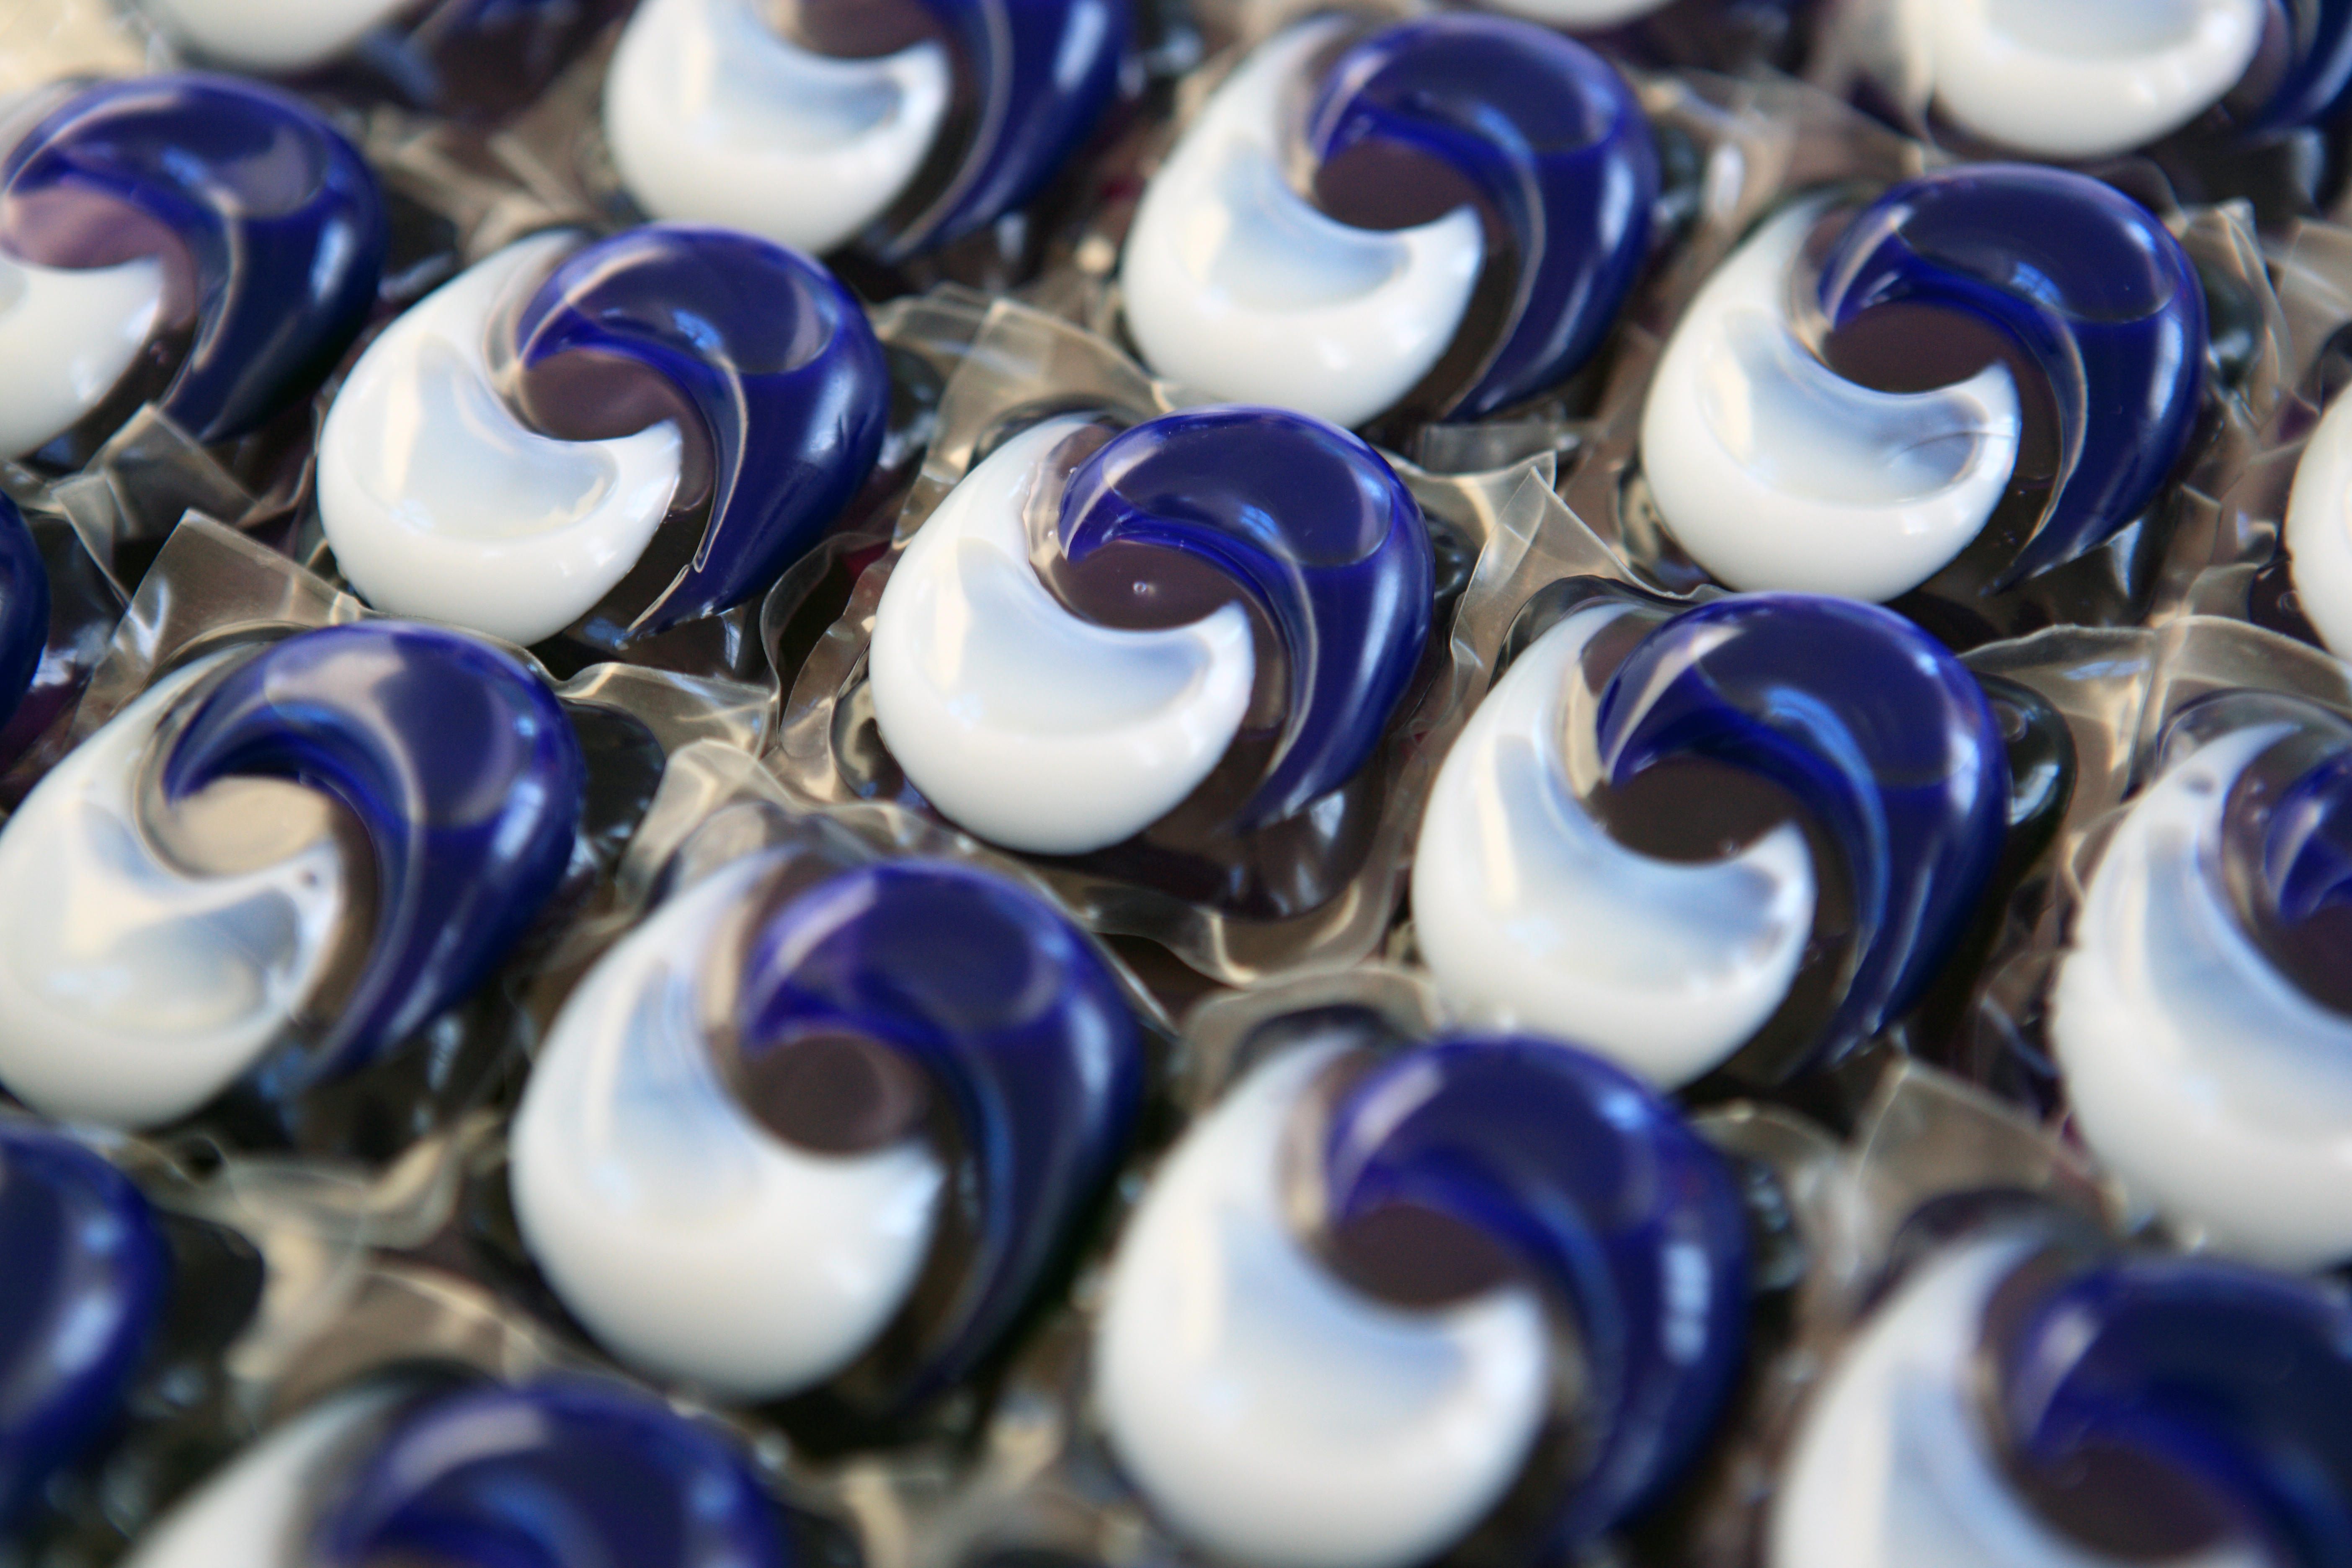 Consumer Reports' Says Laundry Pods Are Too Risky To Recommend